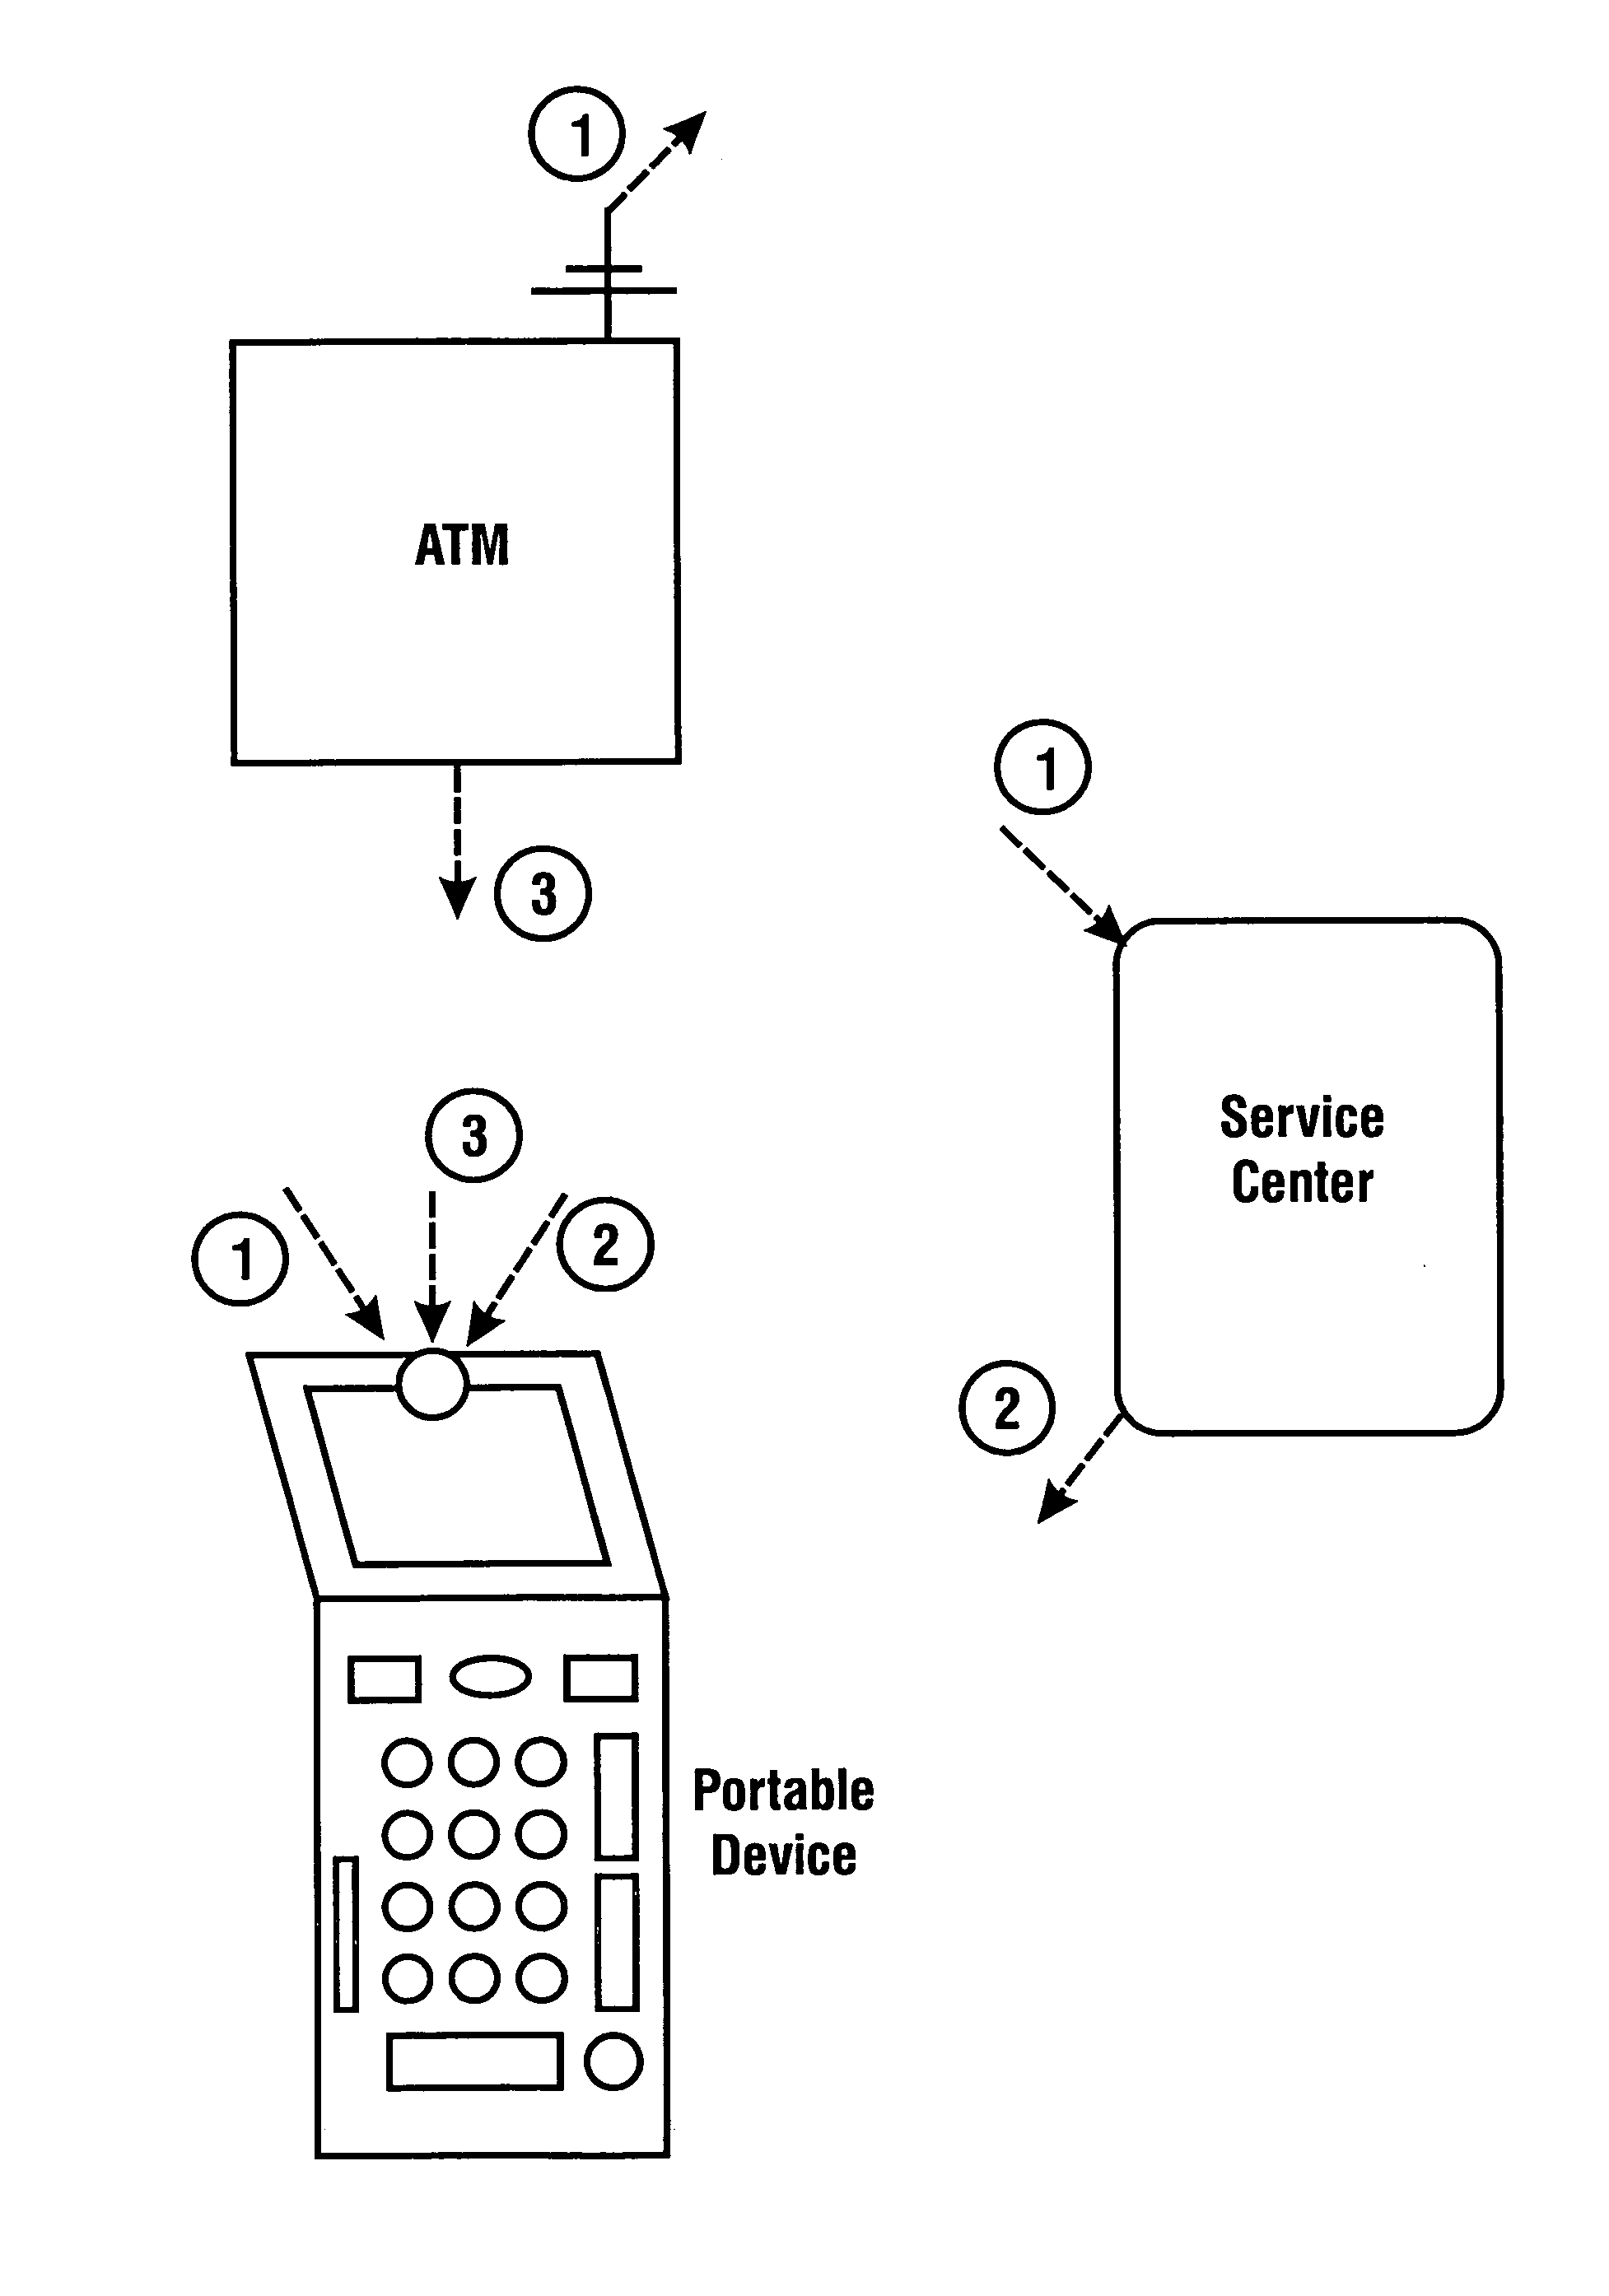 Cash dispensing automated banking machine with GPS